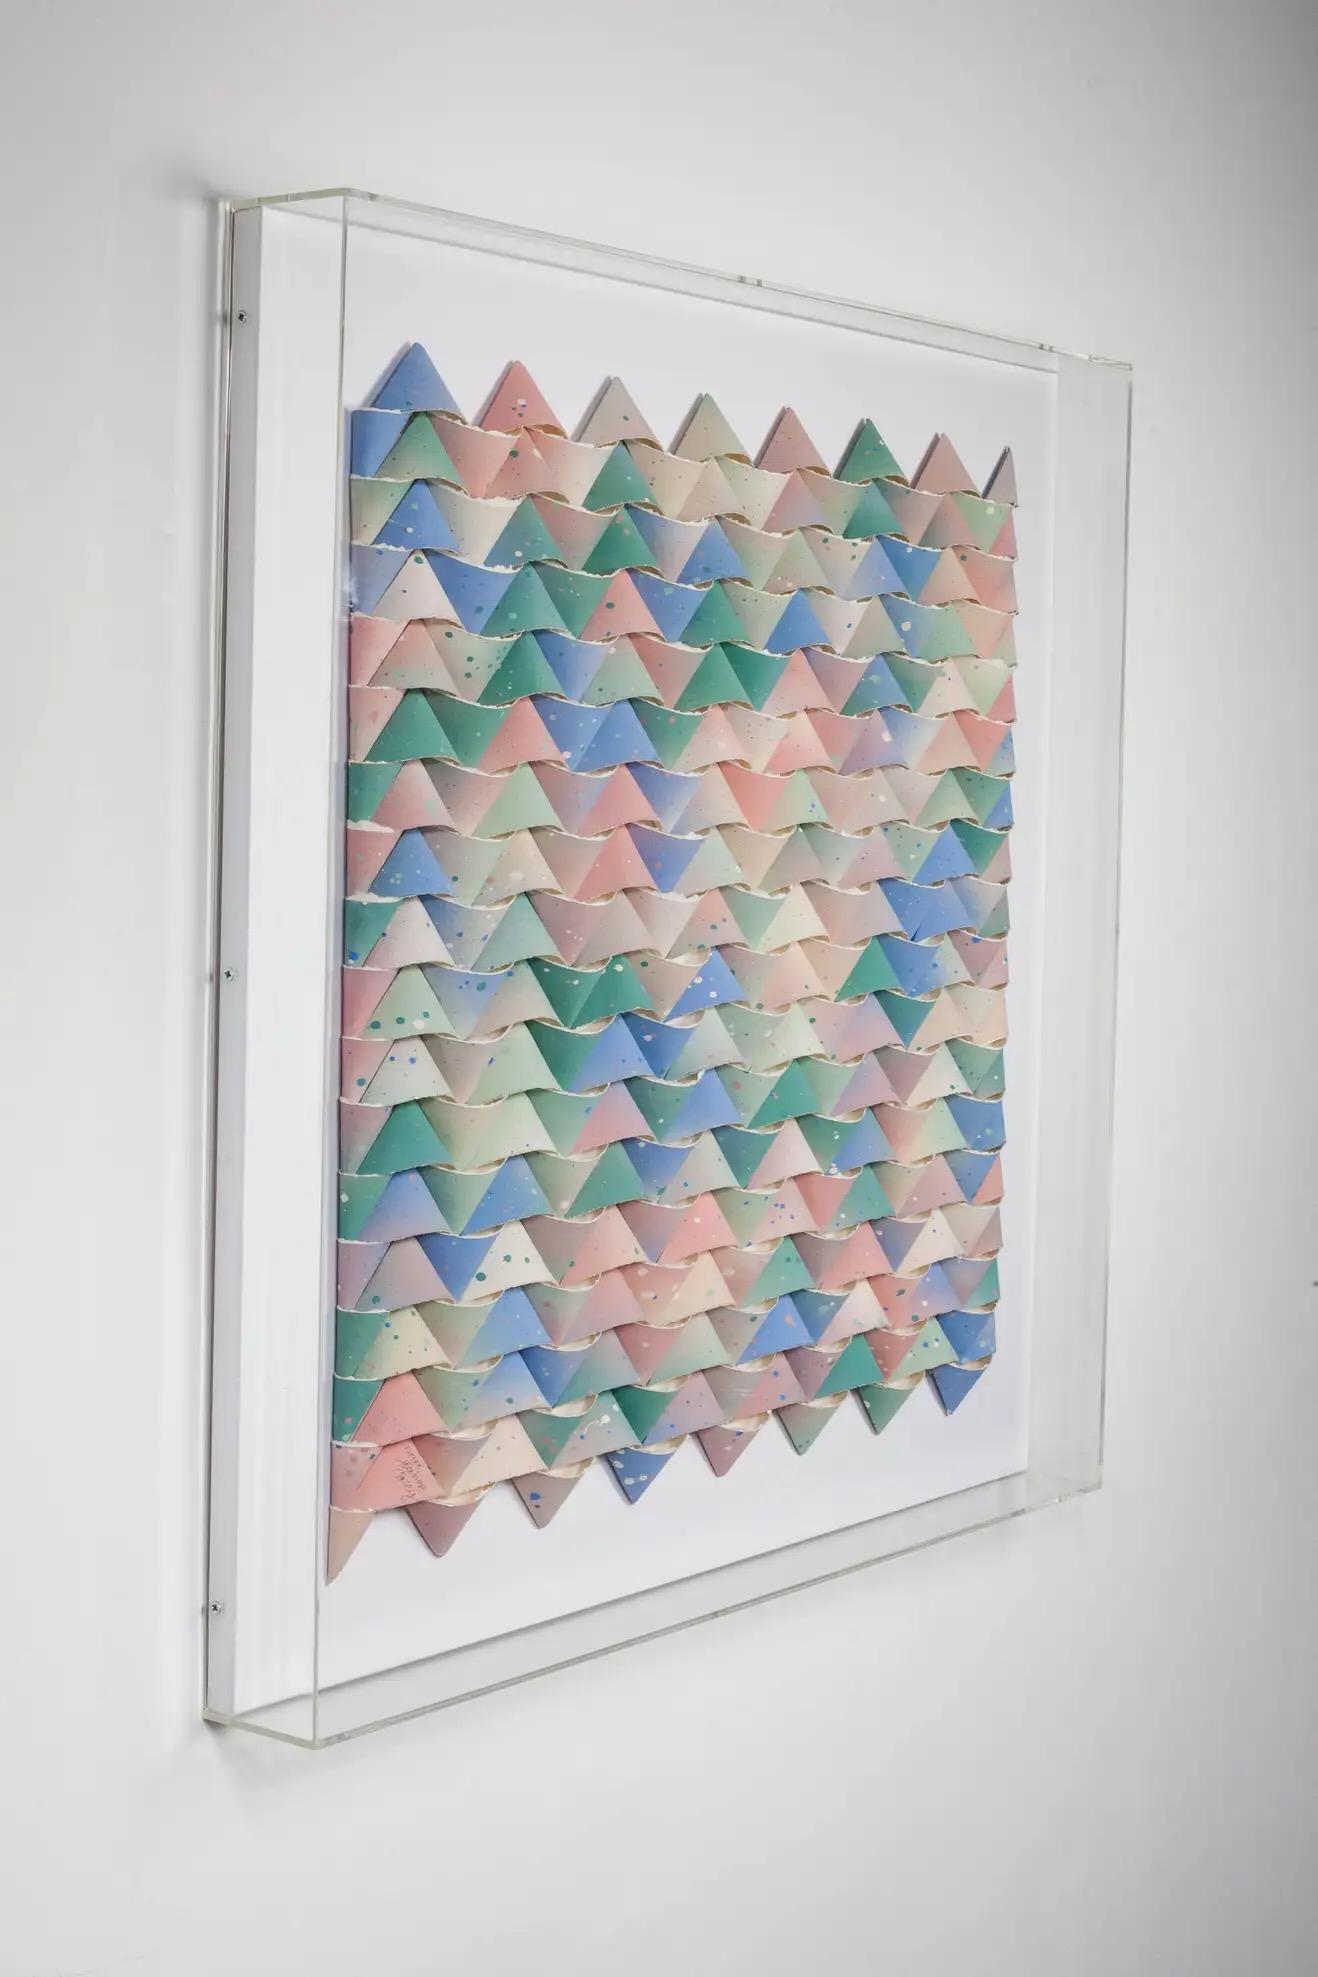 Pastel Folded Paper Wall Art, France, Contemporary In New Condition For Sale In New York, NY